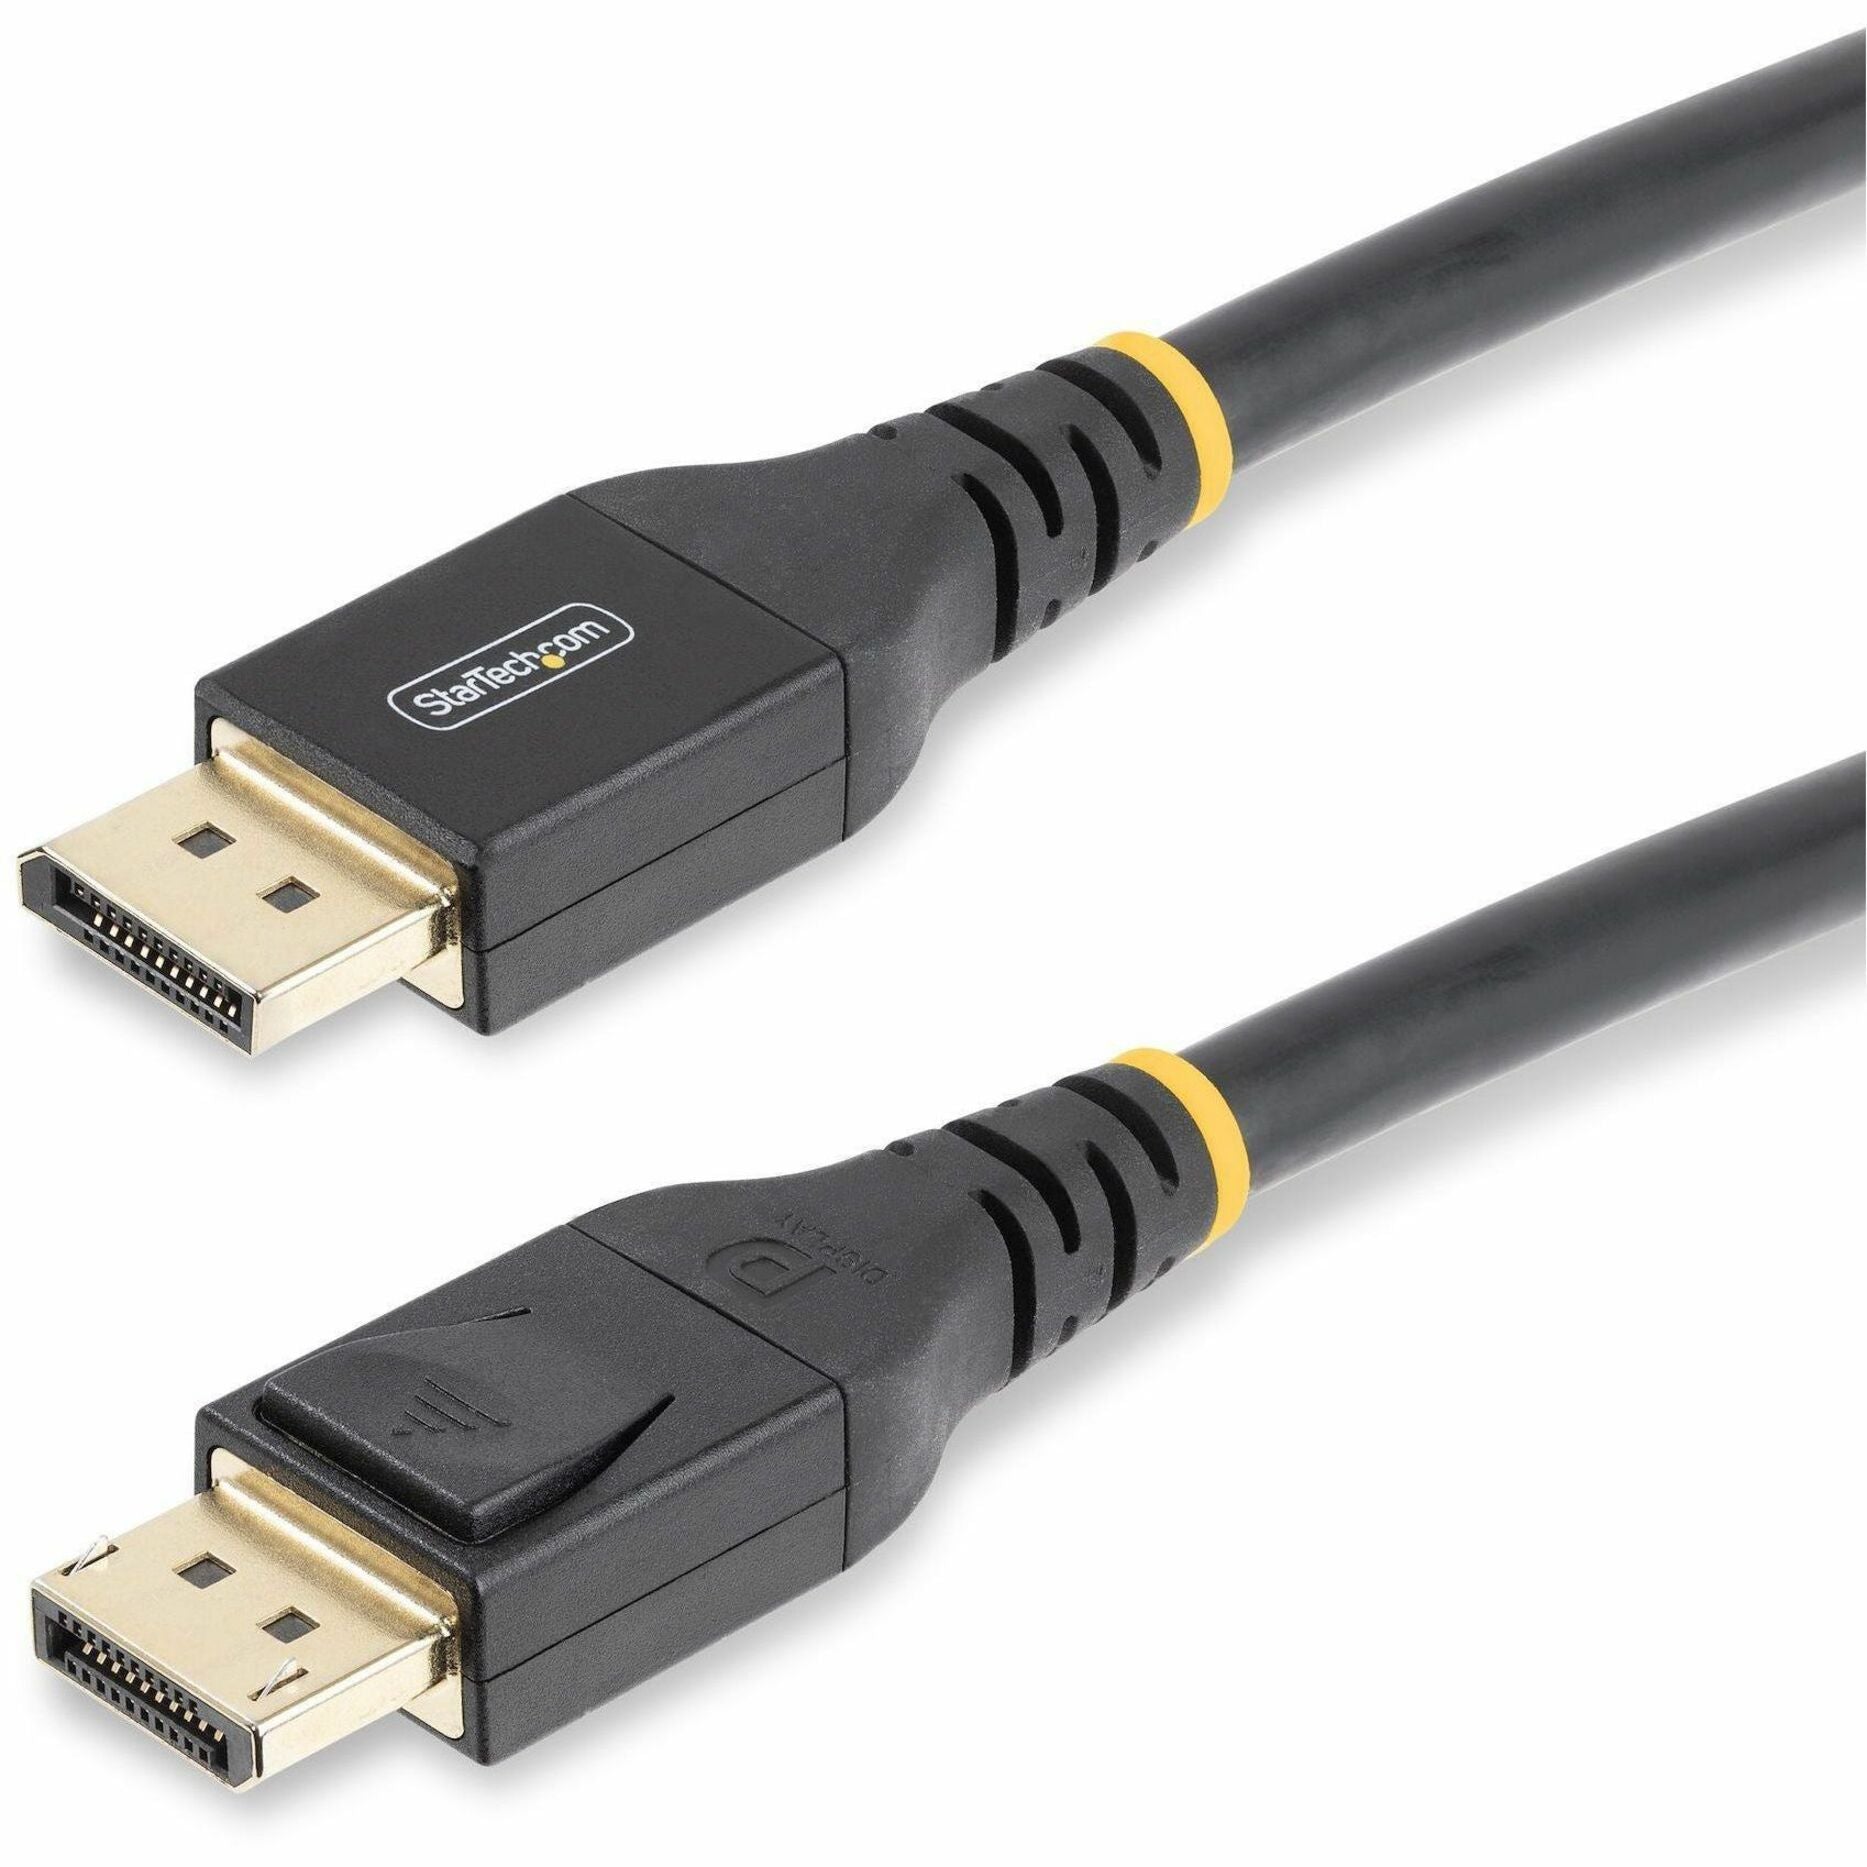 StarTech.com DP14A-10M-DP-CABLE DisplayPort Audio/Video Cable, 33 ft, Bendable, HDR10 Support, 25.9 Gbit/s Data Transfer Rate